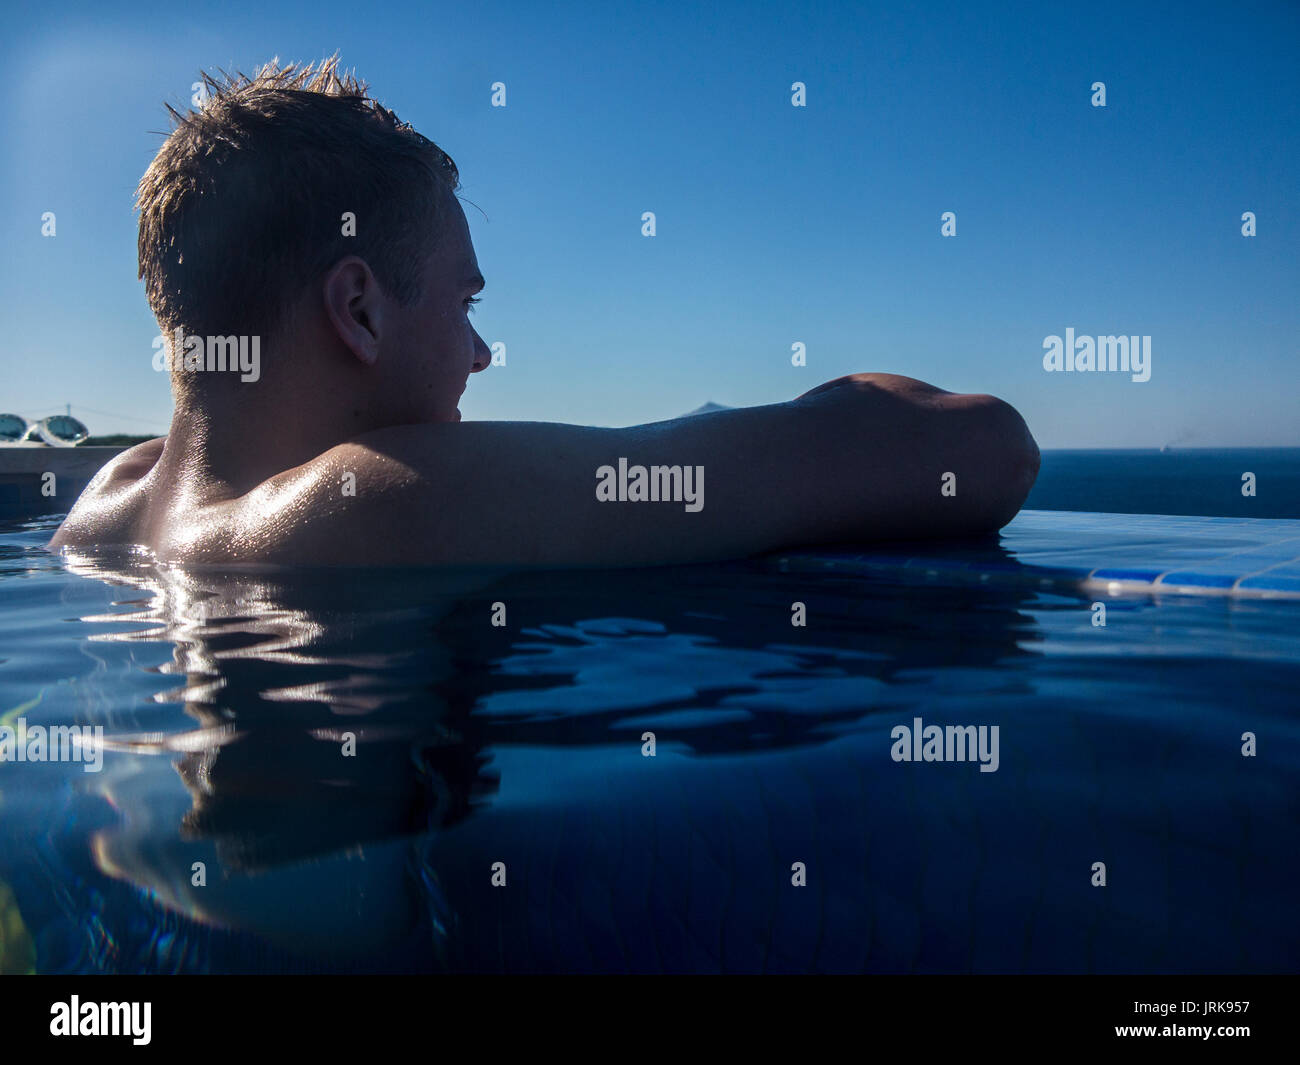 A muscular teenager enjoys the view in an infinity pool Stock Photo